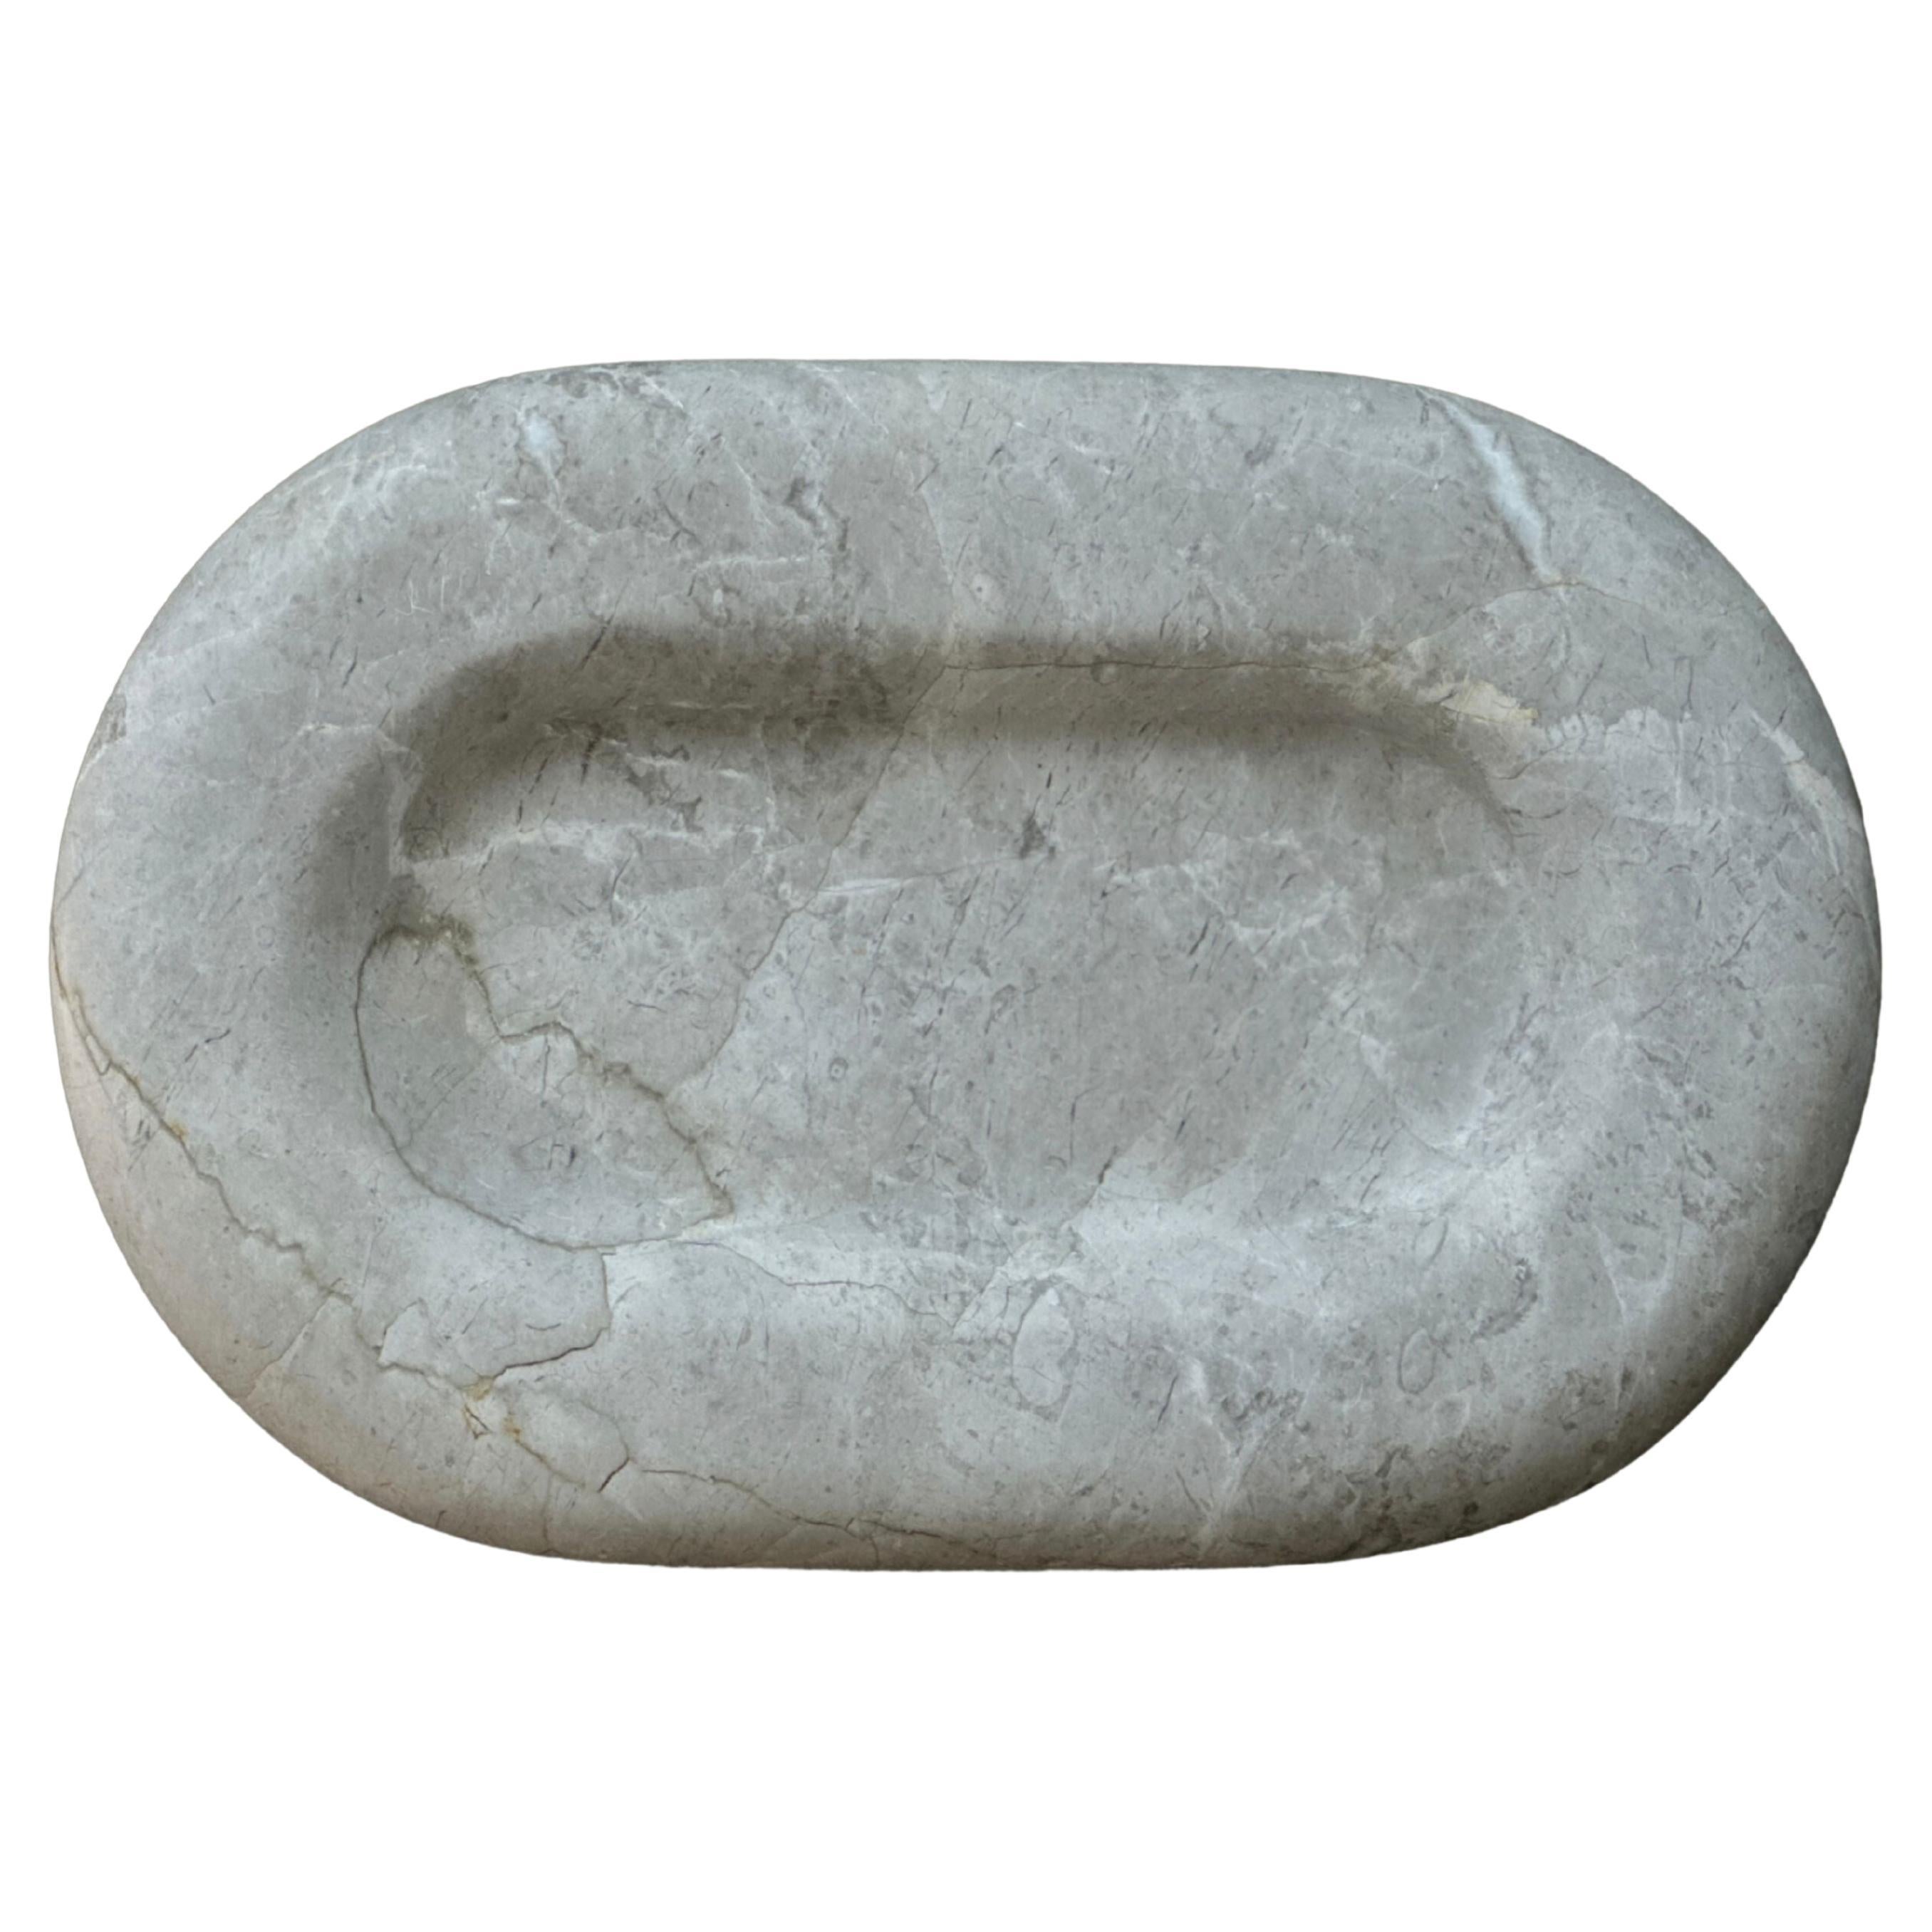 Maddi Catch: Puffed Border Tray in Oyster Marble by Anastasio Home For Sale